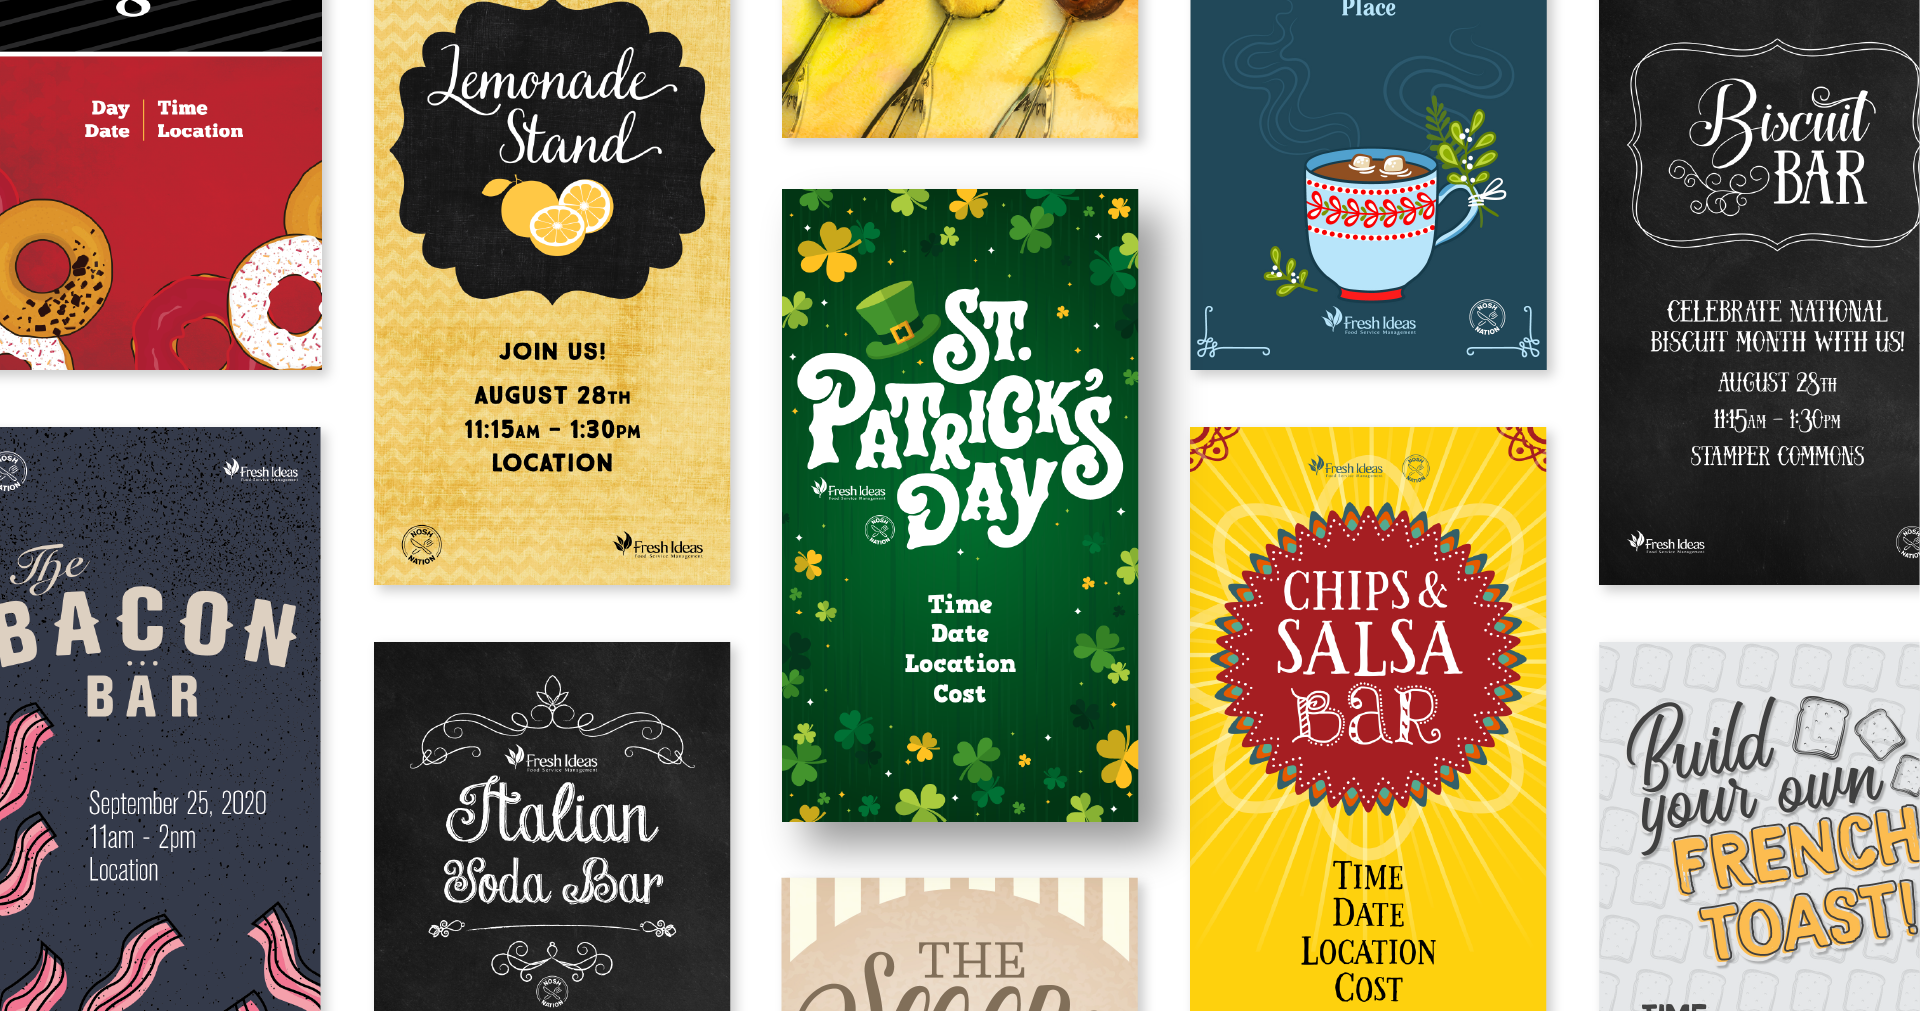 A collection of horizontal posters. The center one advertising a St. Patrick's Day event. Other themes include: Lemonade stand, Italian Soda bar, icecream, chips and salsa and hot chocolate.